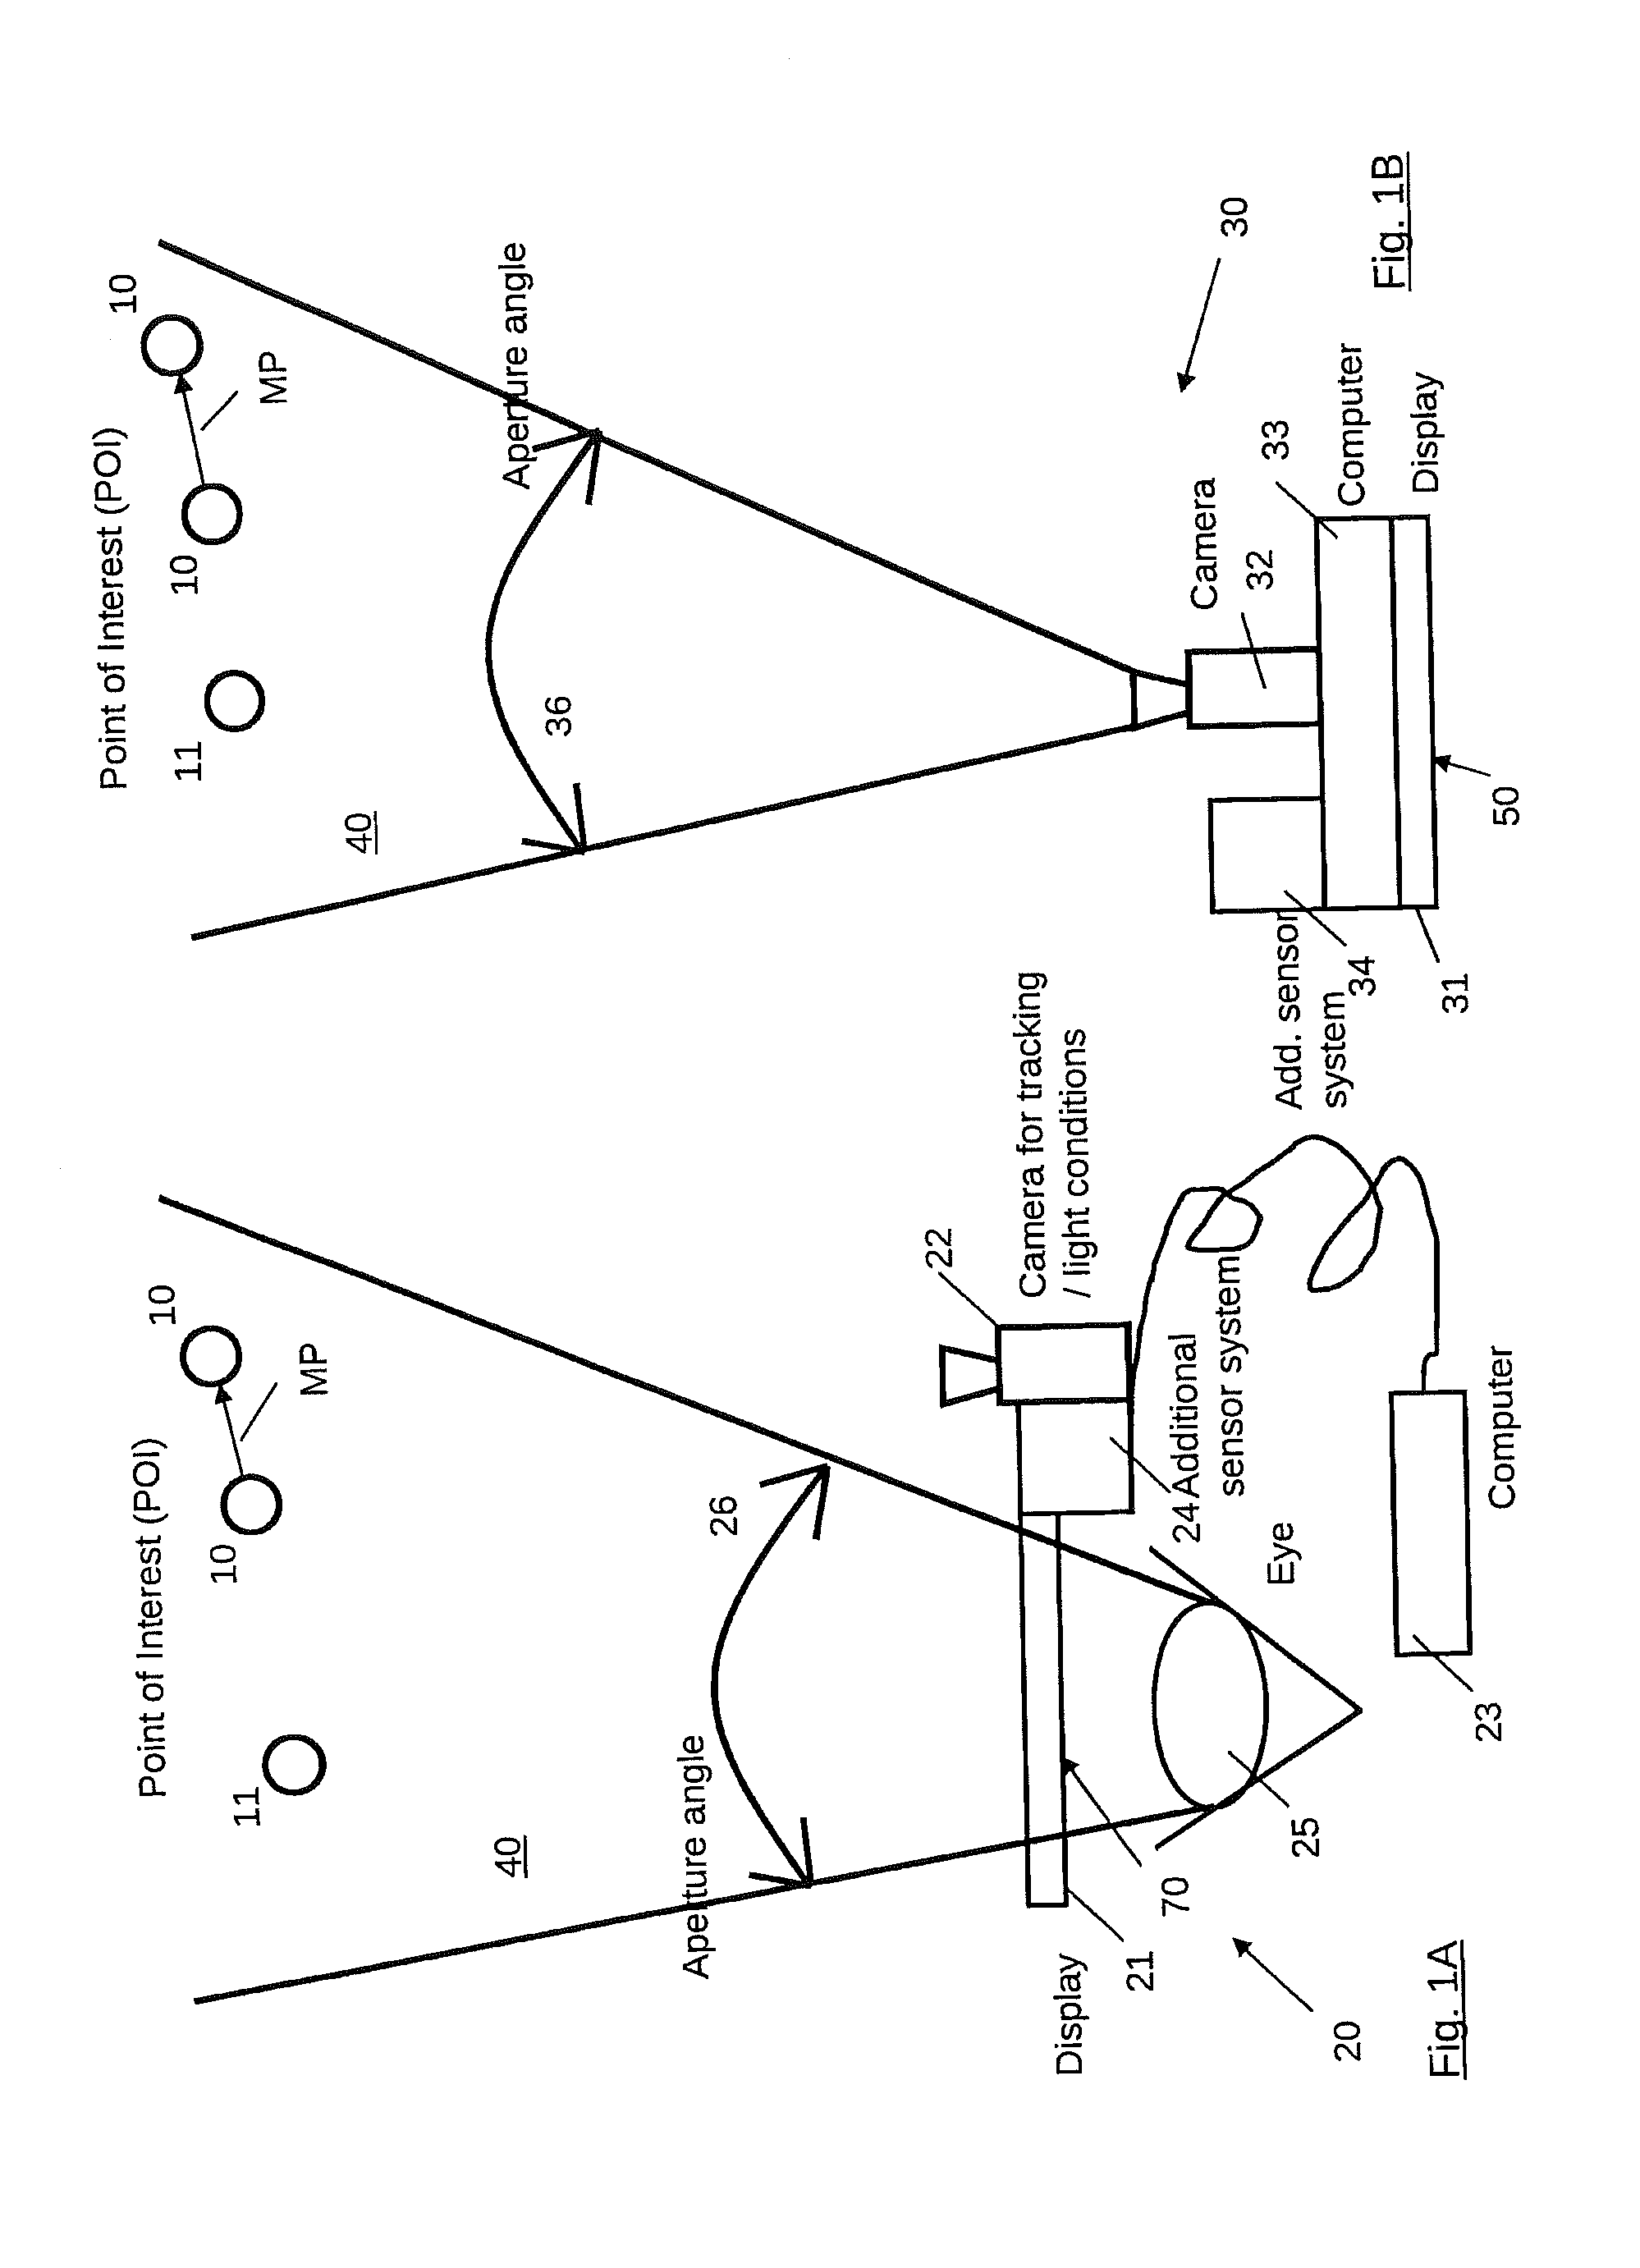 Method for representing virtual information in a view of a real environment